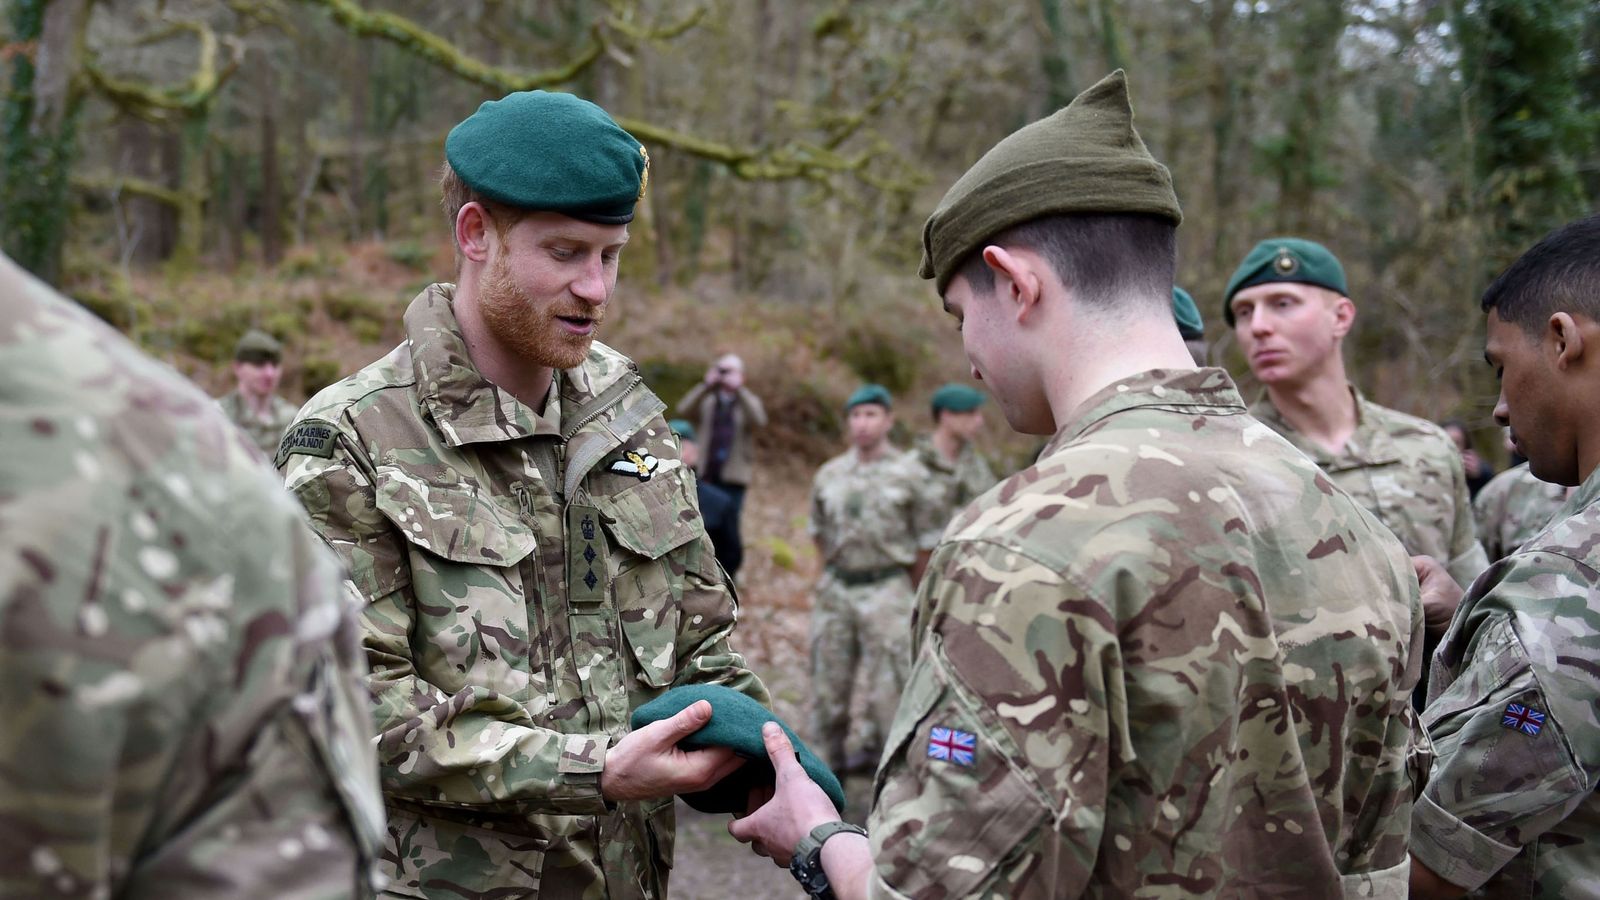 Prince Harry presents Royal Marines with green berets